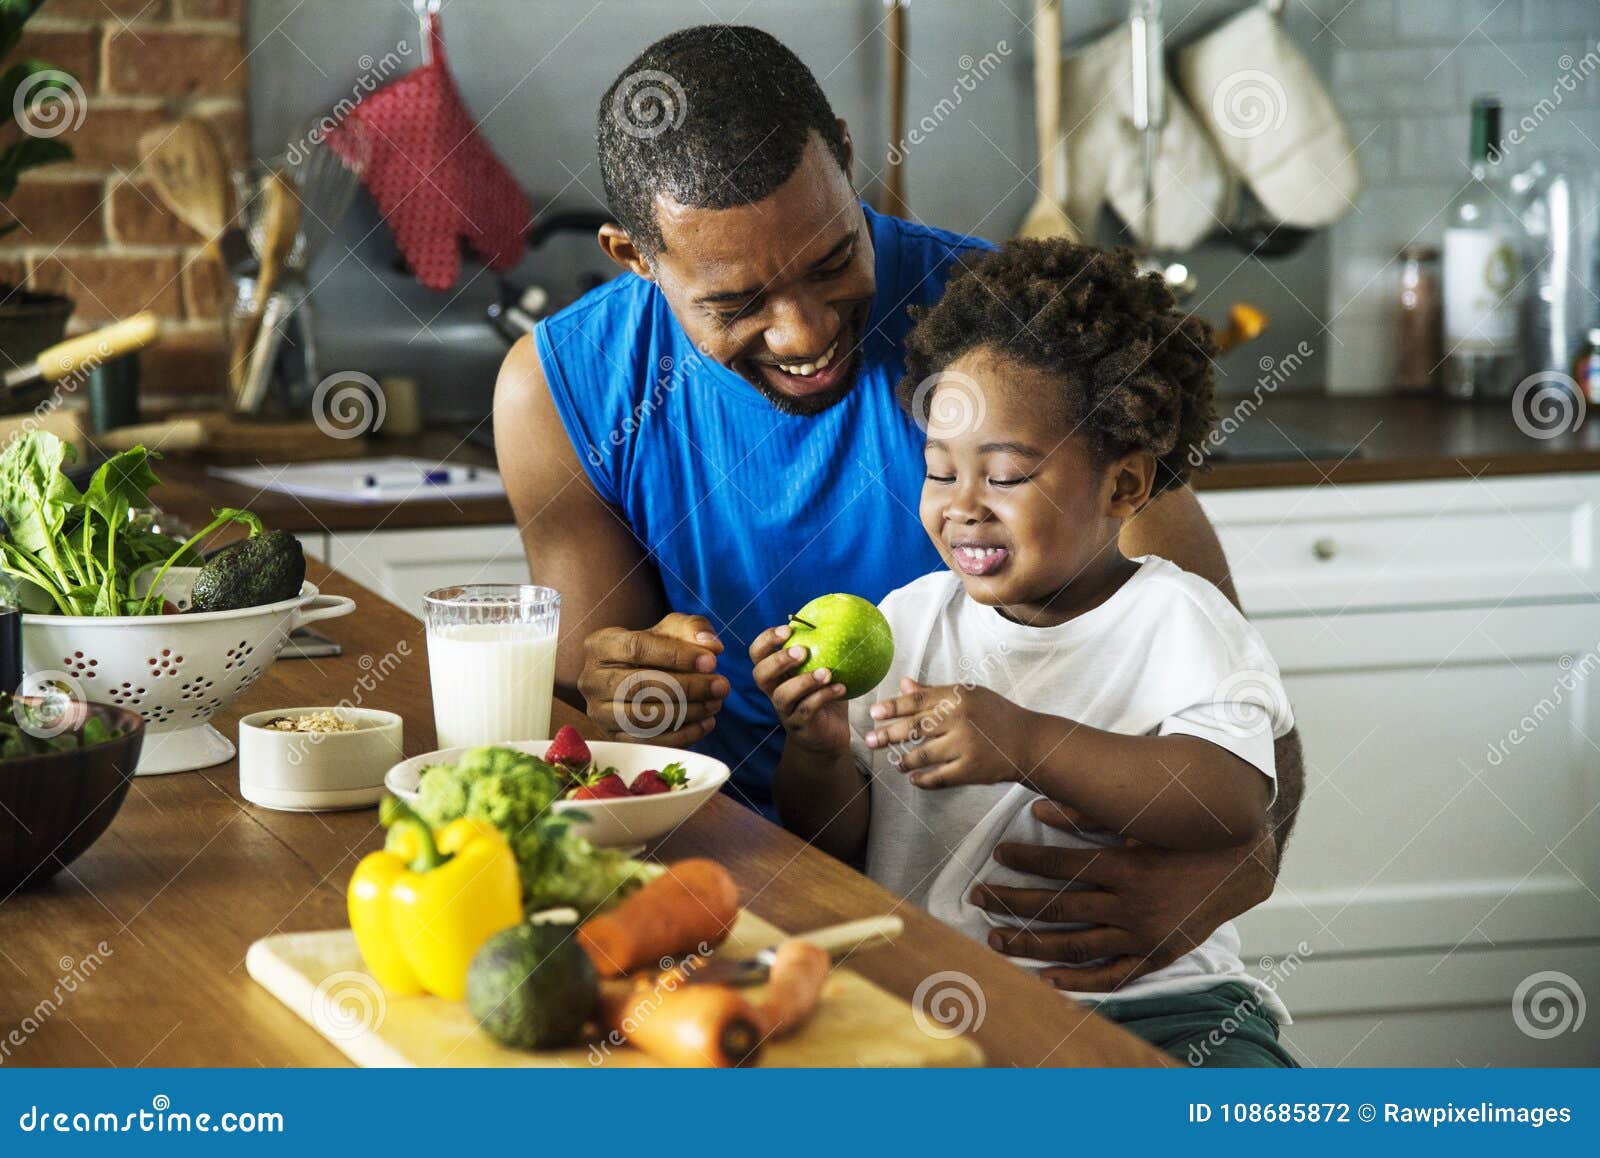 dad and son cooking together